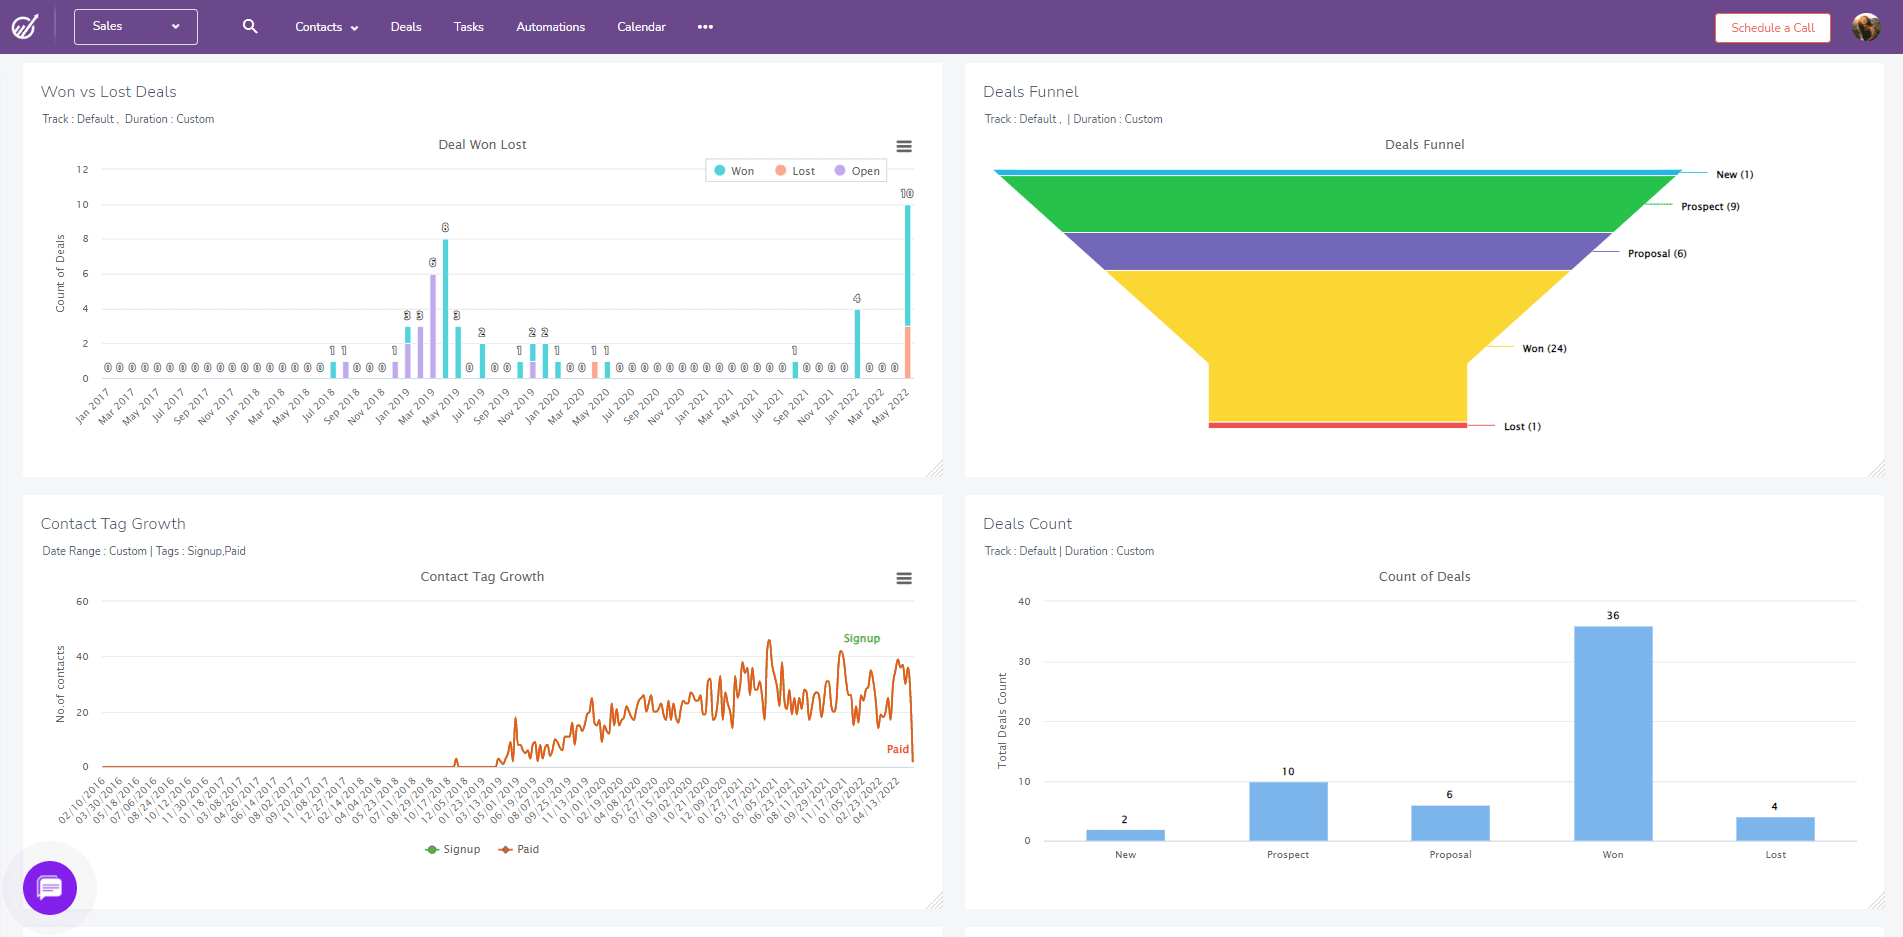 Overall sales performance dashboard sample from EngageBay